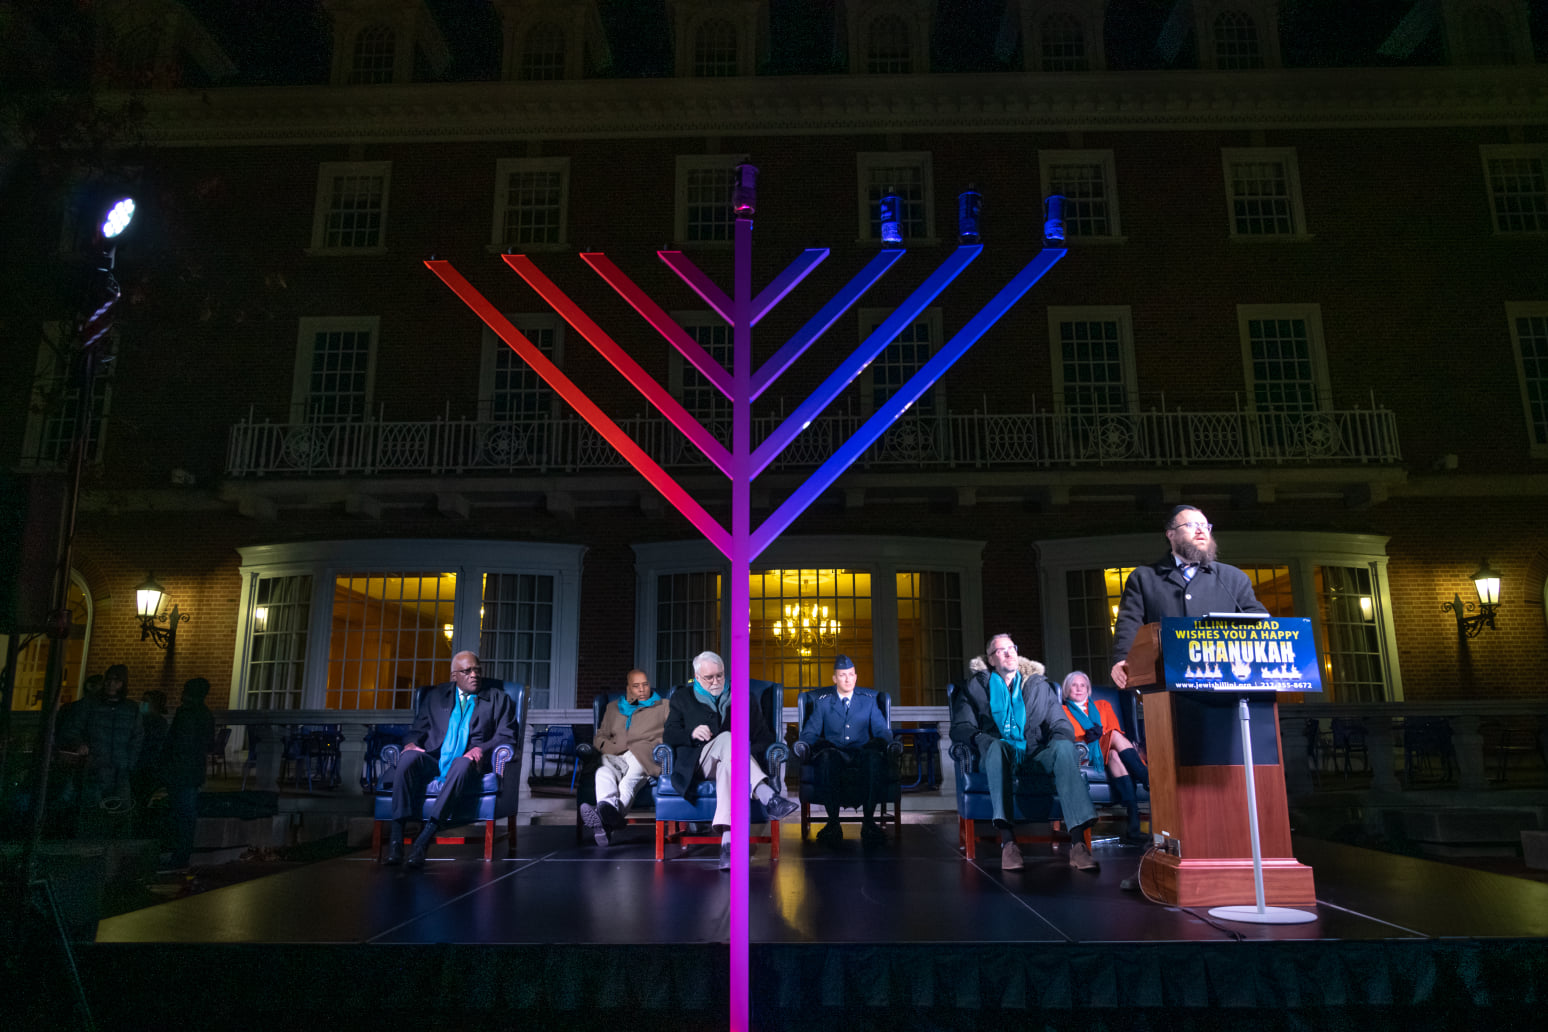 Join Illini Chabad and Champaign Center Partnership for a pre-Chanukah menorah lighting